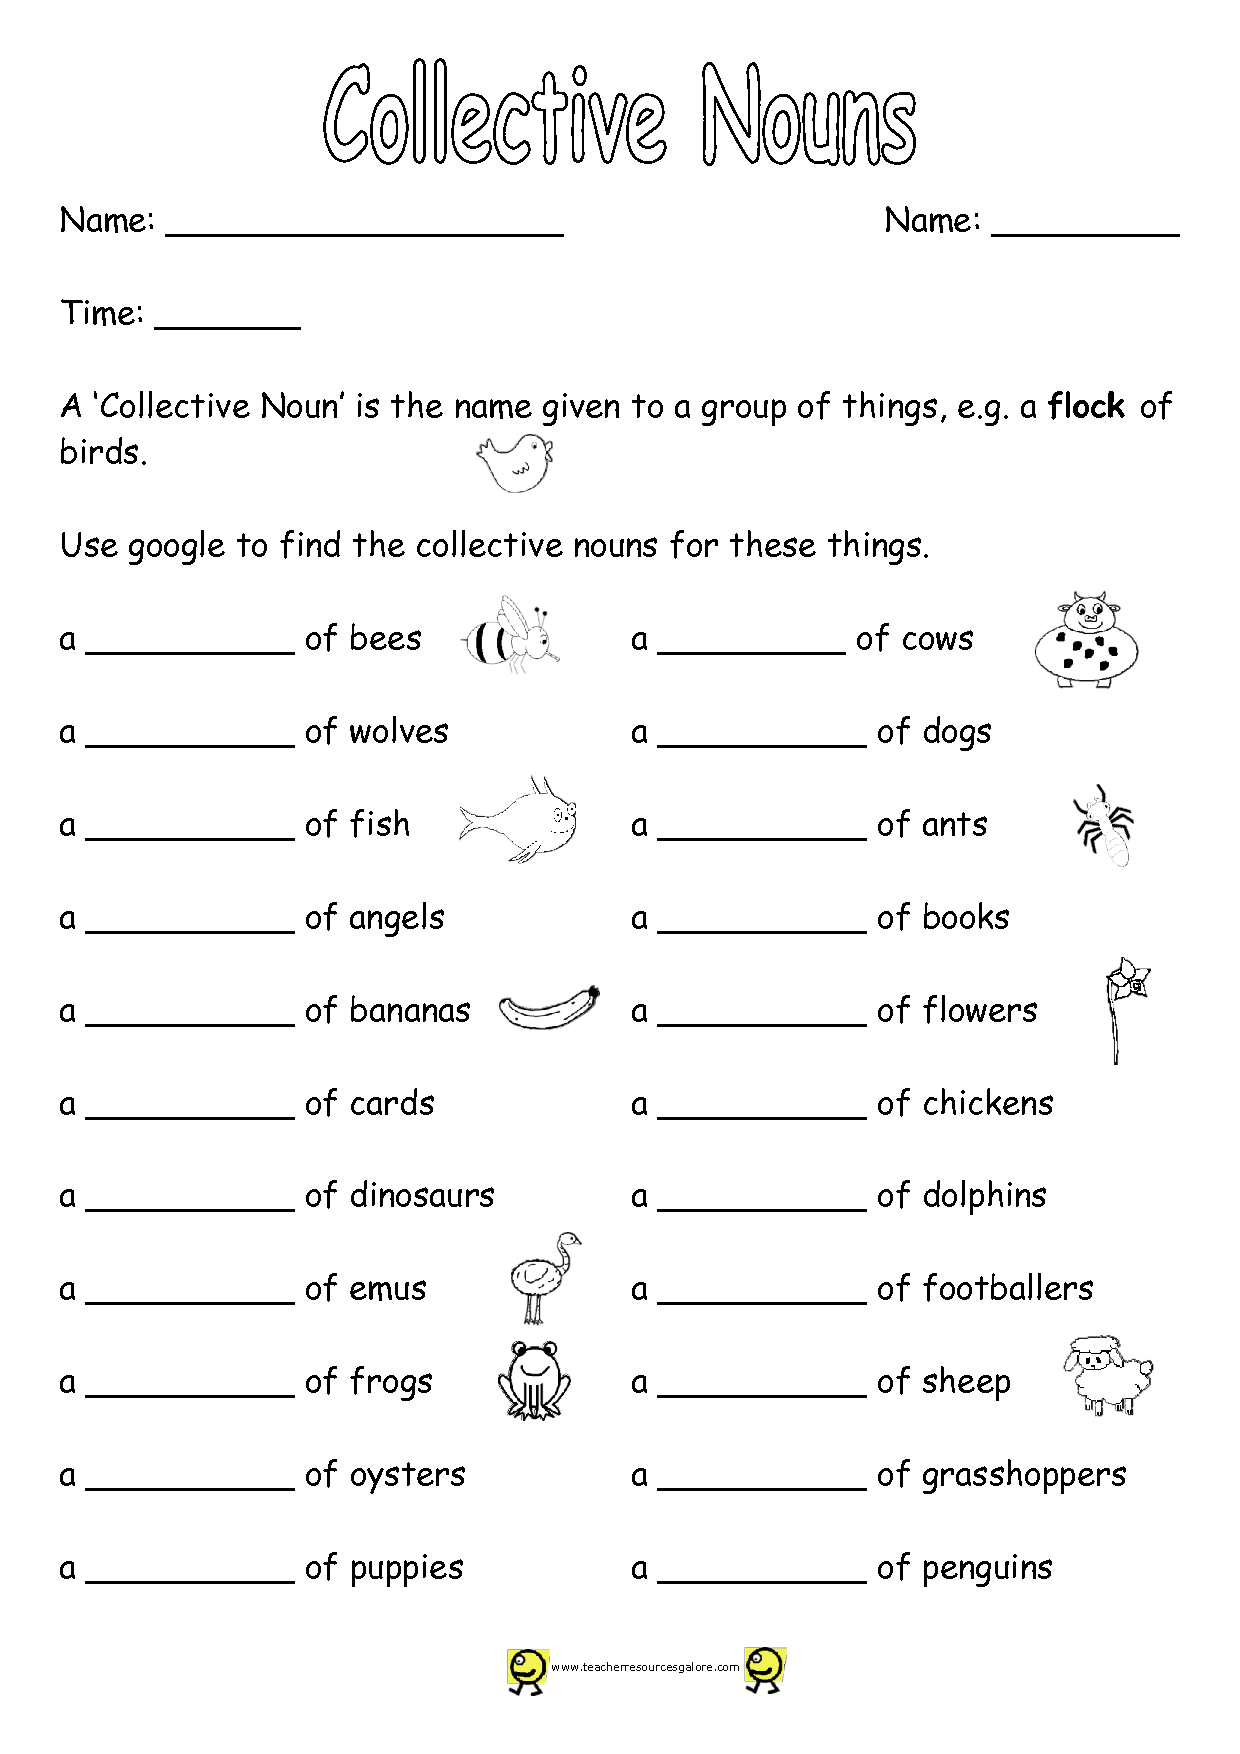 collective-nouns-online-worksheet-for-grade-5-you-can-do-the-exercises-online-or-download-the